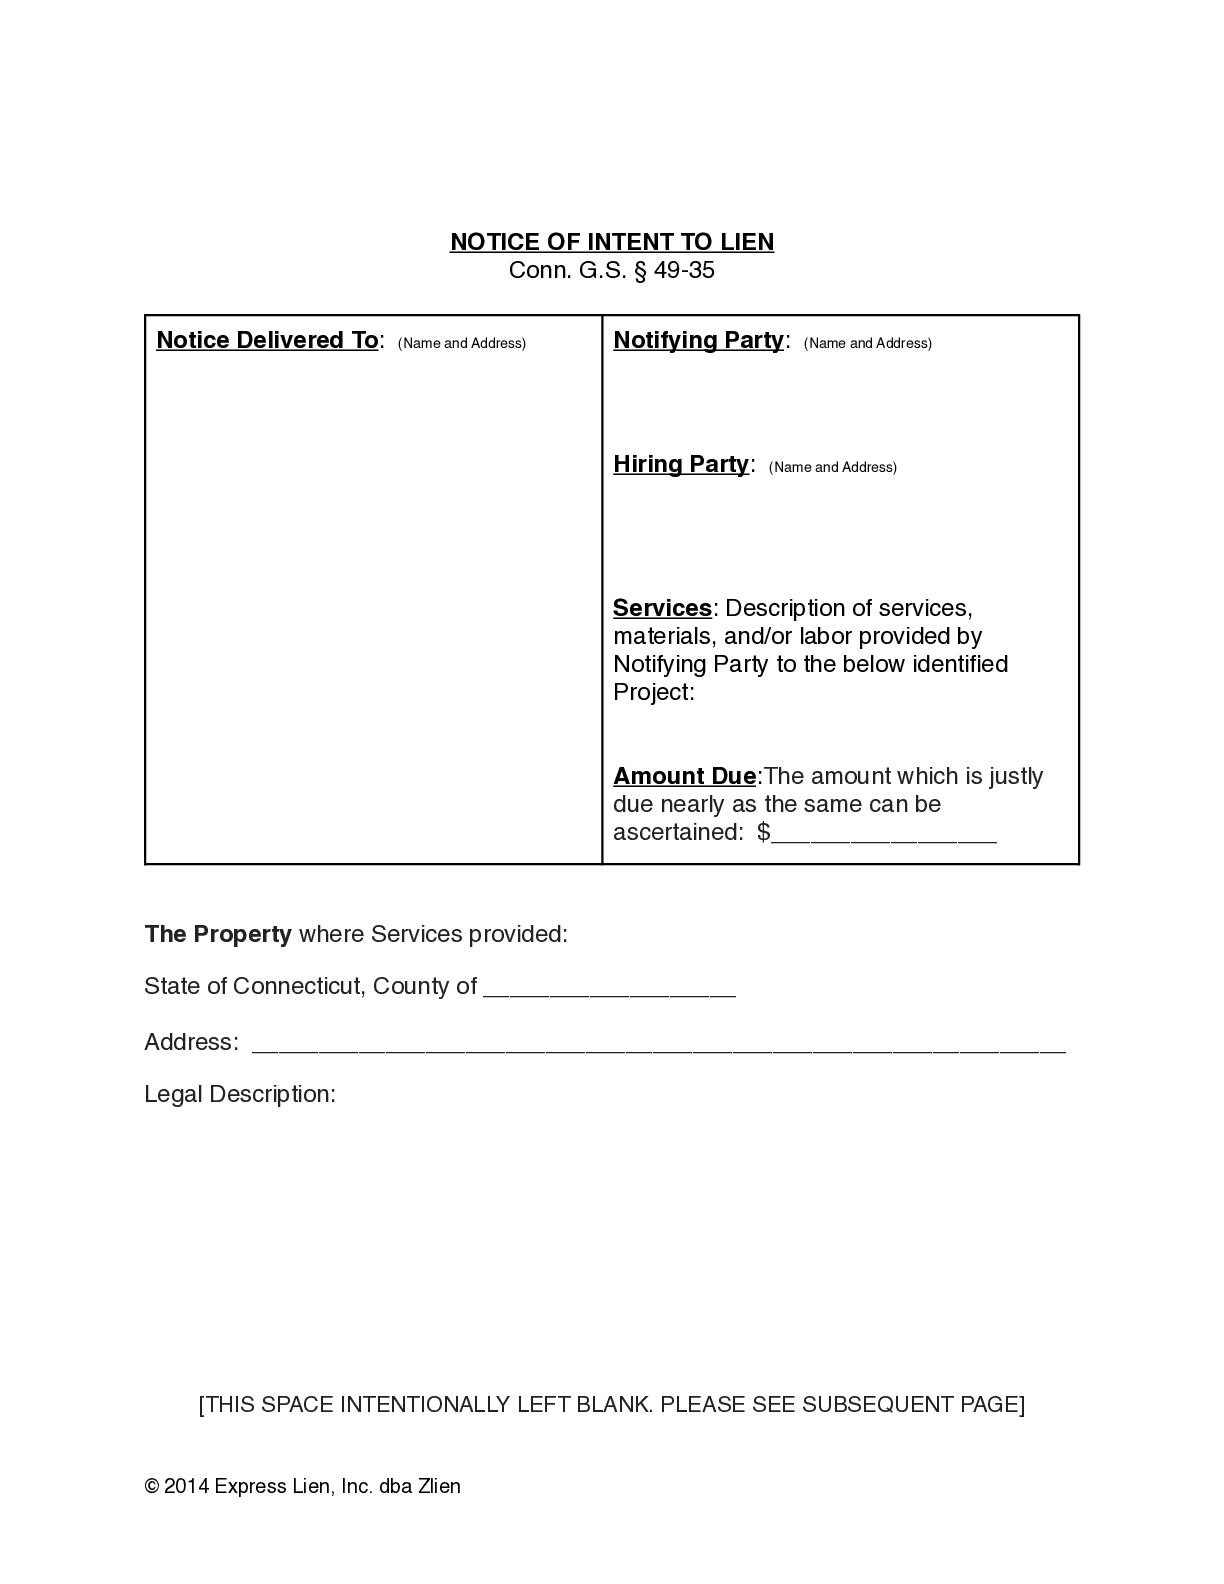 Connecticut Notice of Intent to Lien Form | Free Downloadable Template